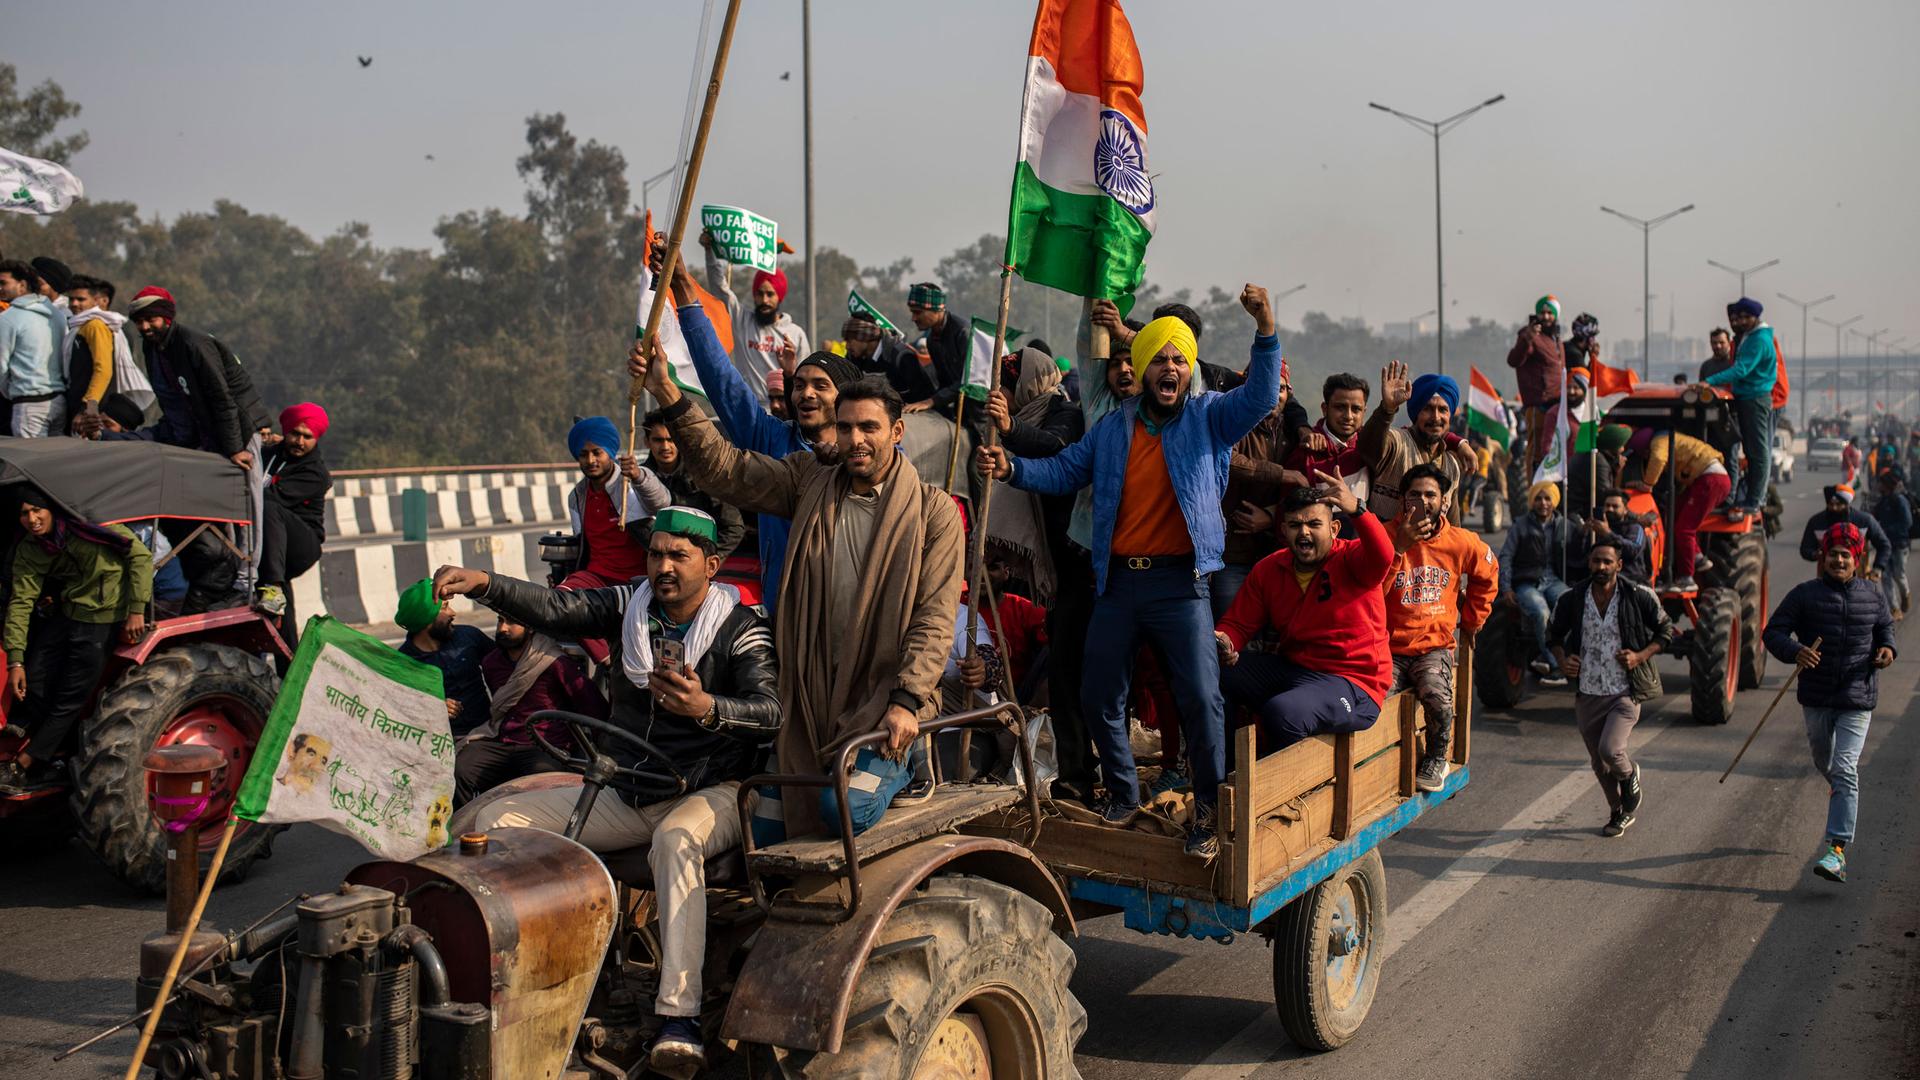 Protesters ride farm tractors in the road while carrying flags.